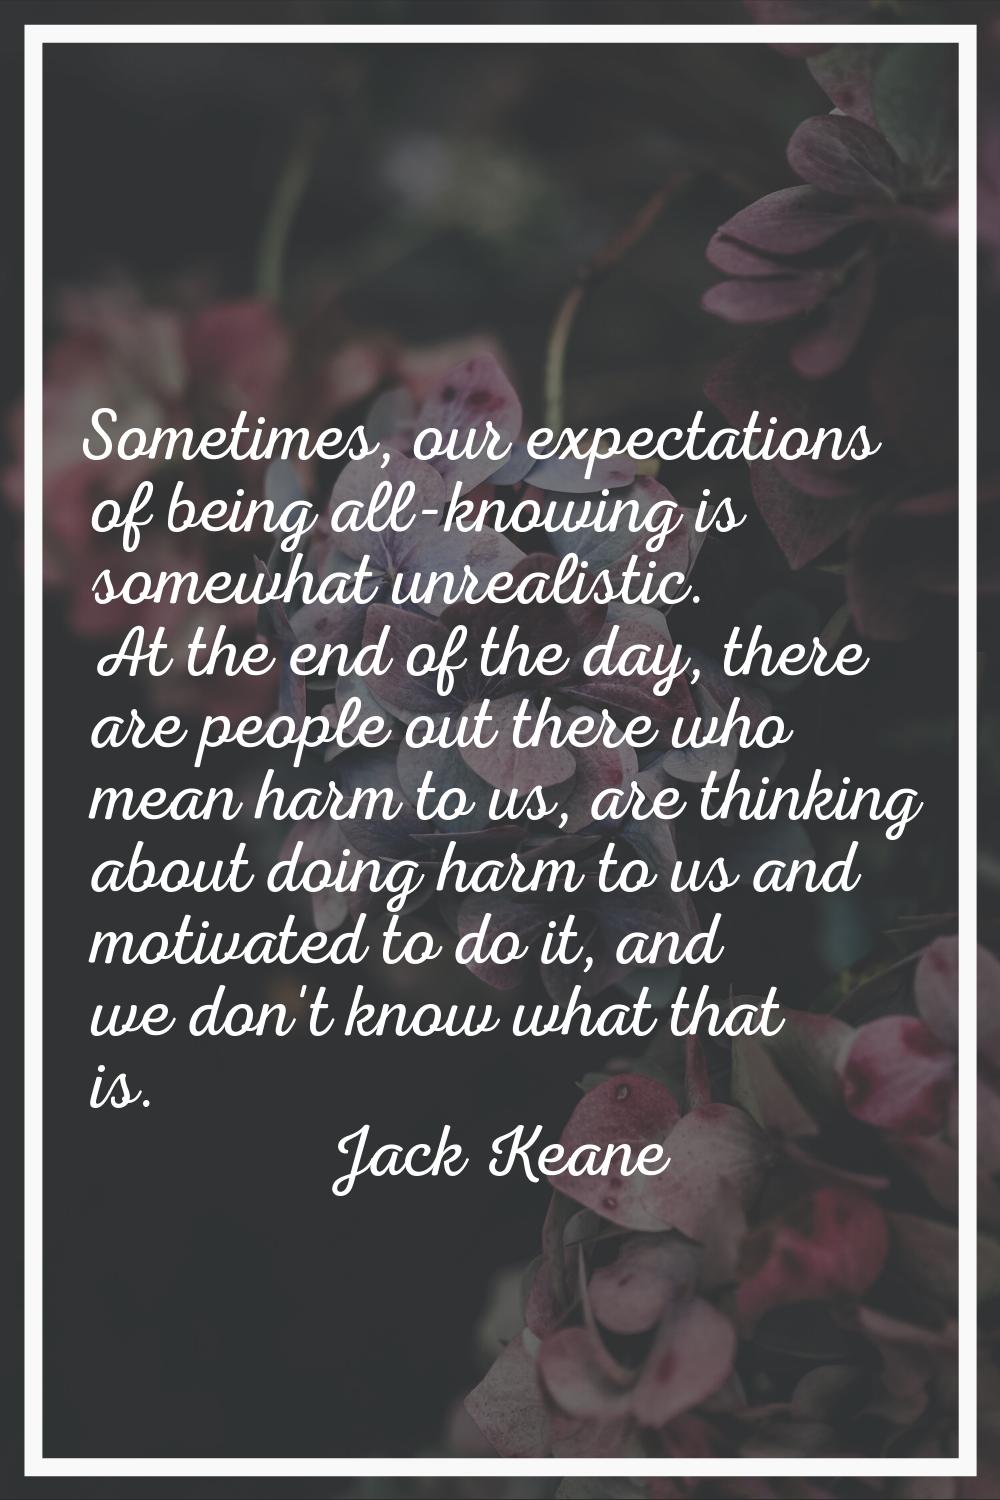 Sometimes, our expectations of being all-knowing is somewhat unrealistic. At the end of the day, th